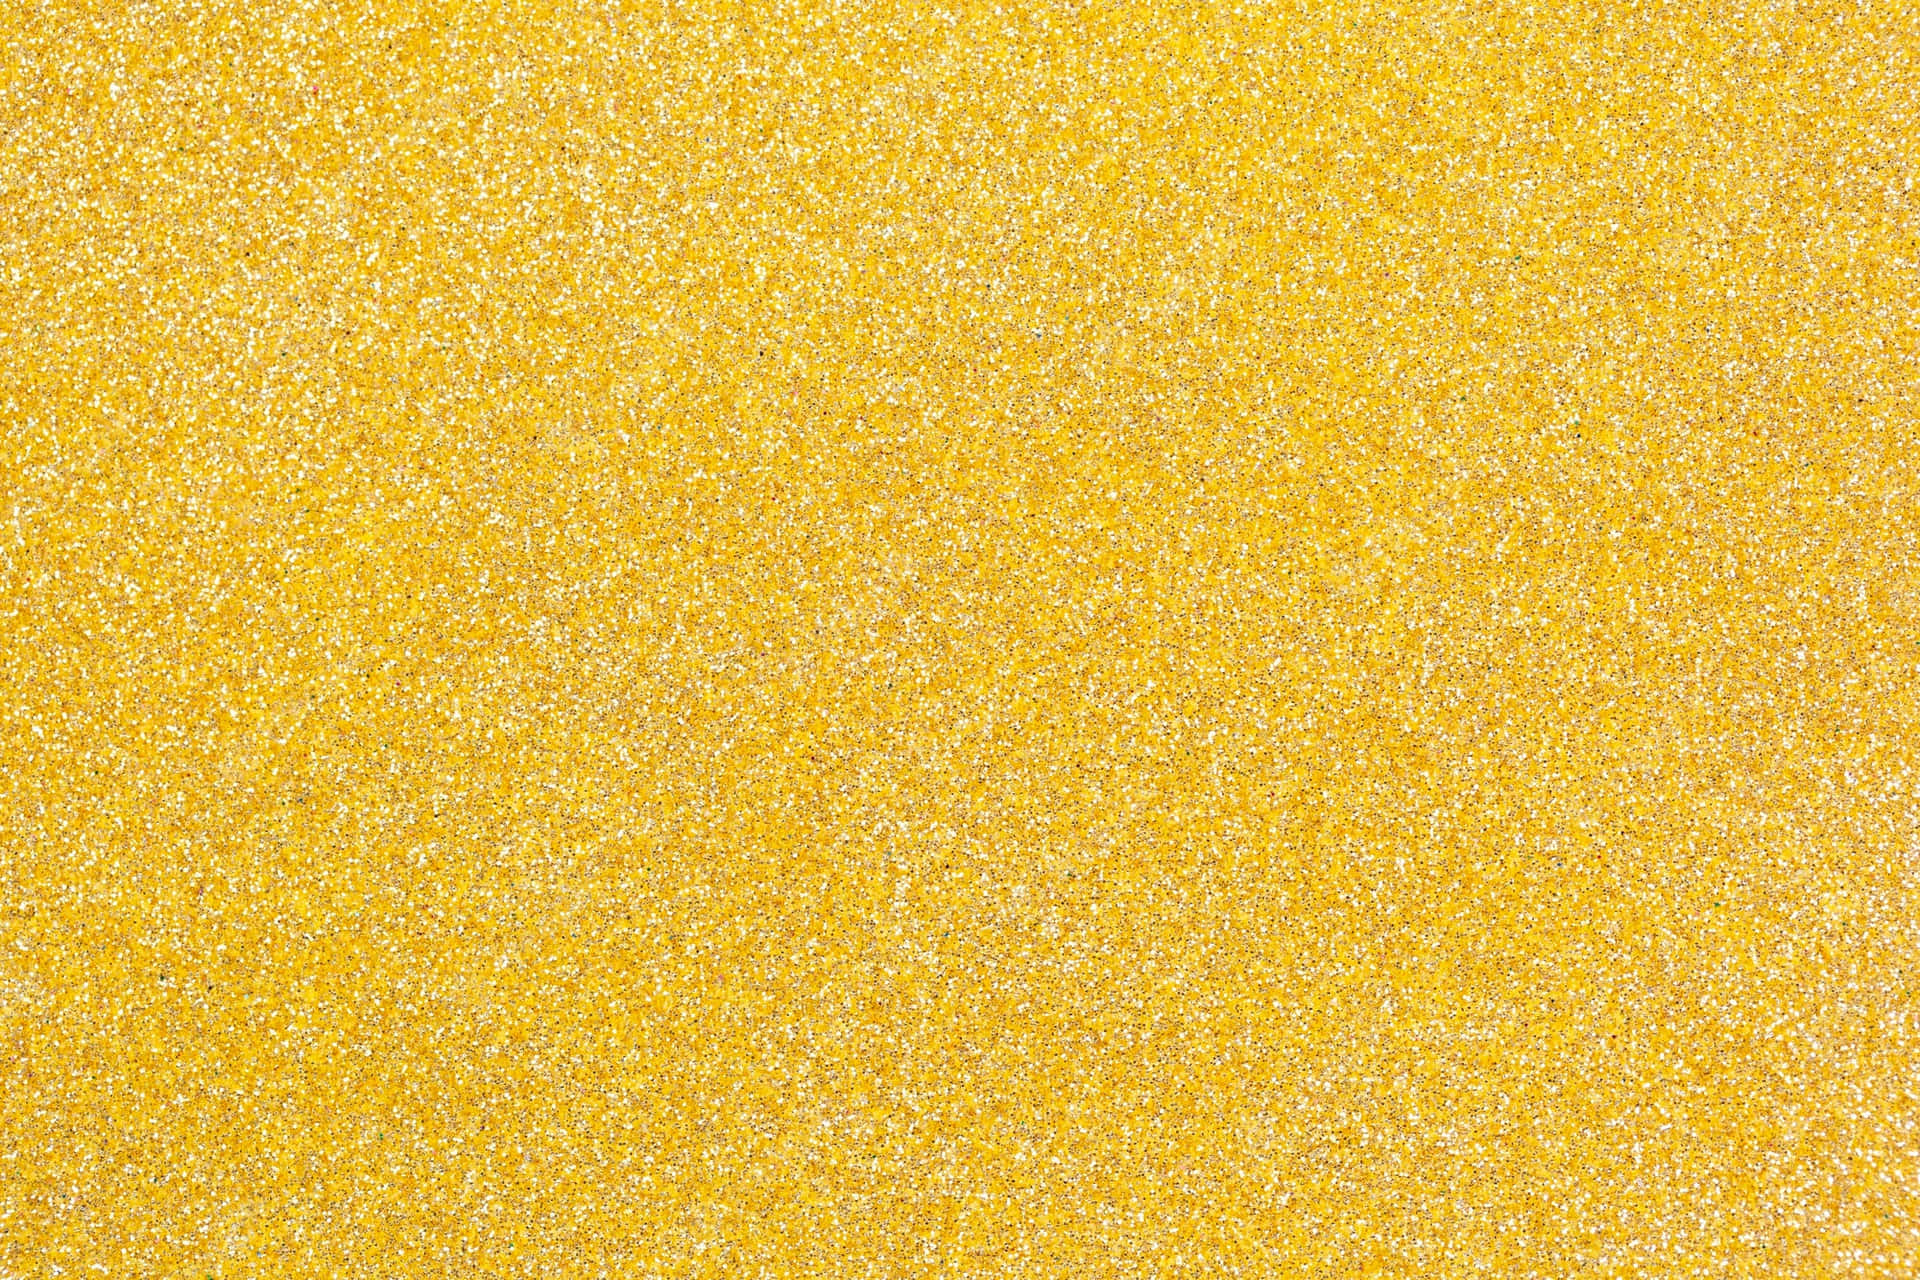 Aesthetic and eye-catching yellow glitter background